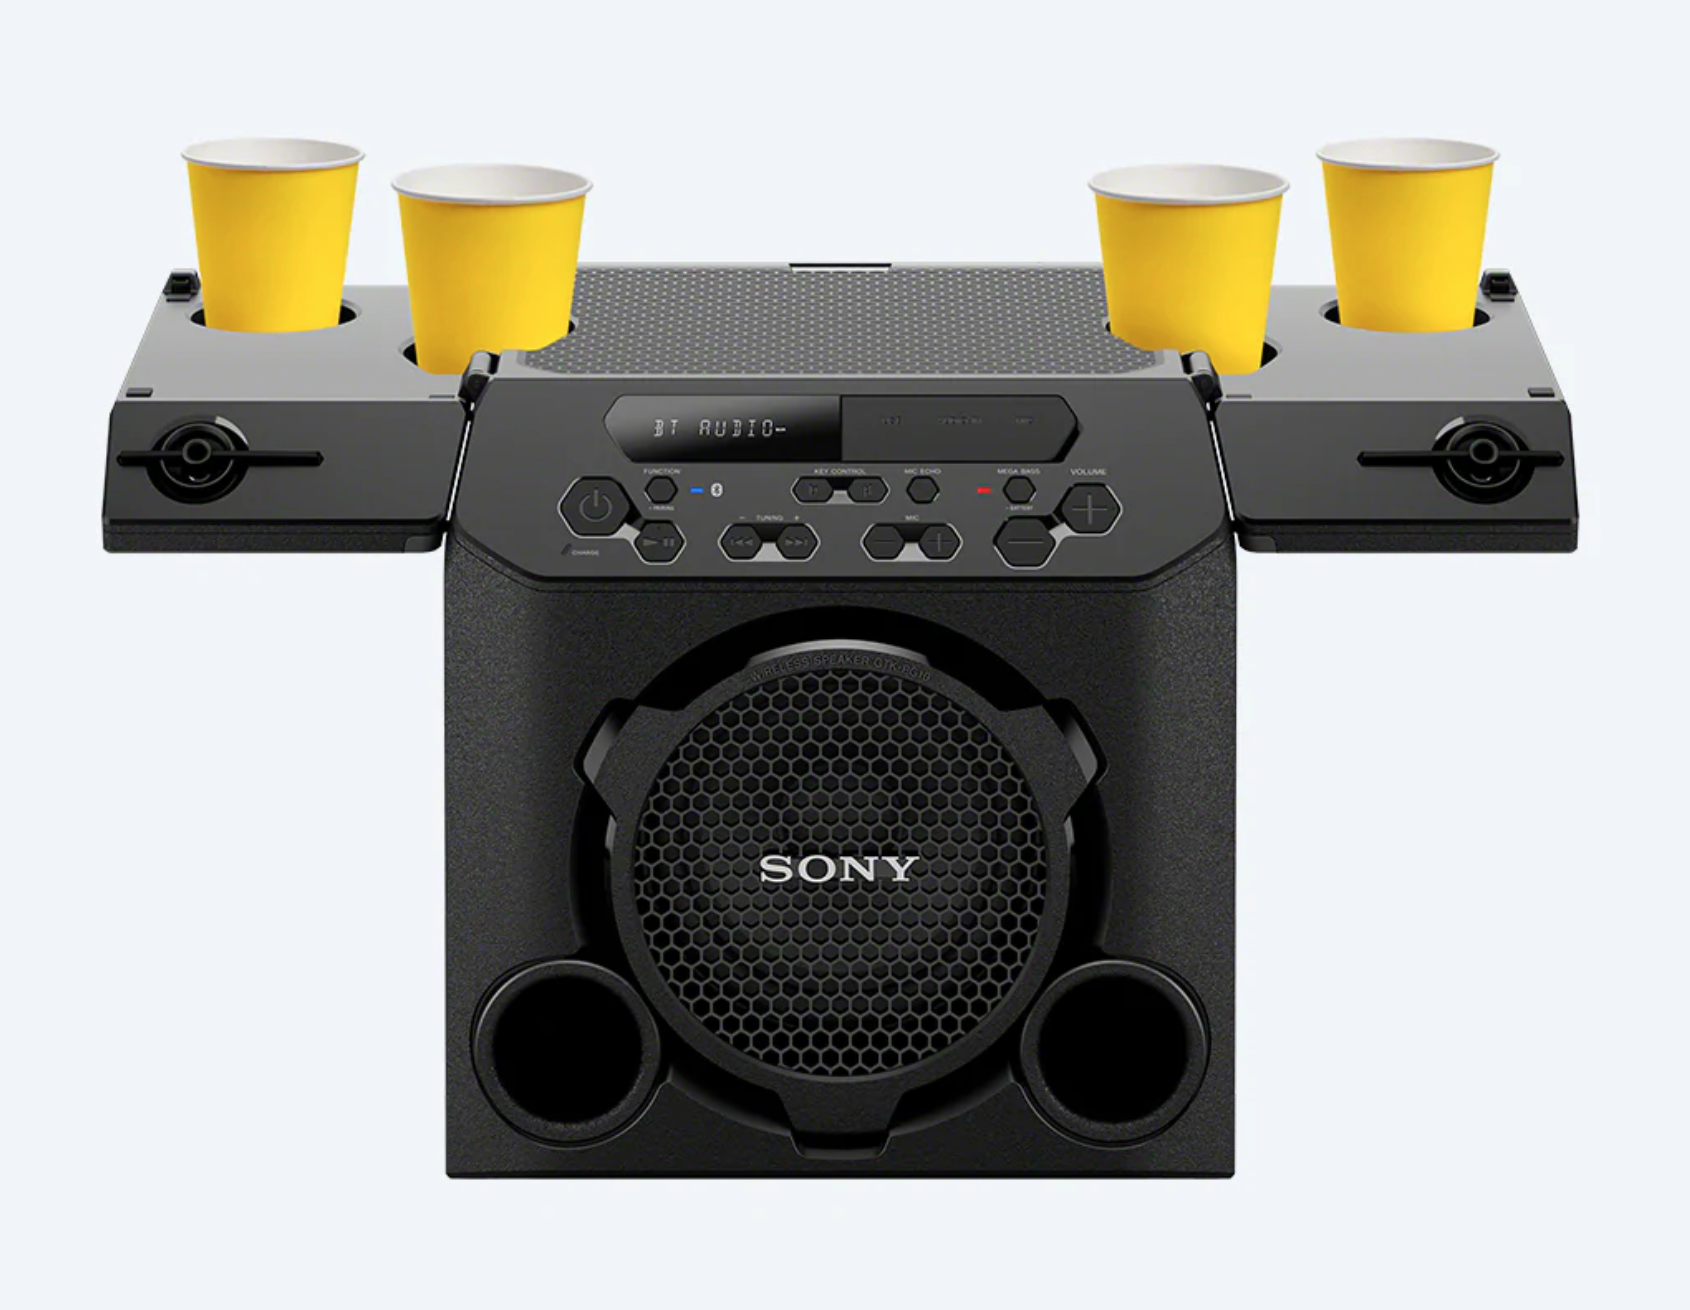 Sony's Outdoor Party Speaker with Beer Holders - Take My Money